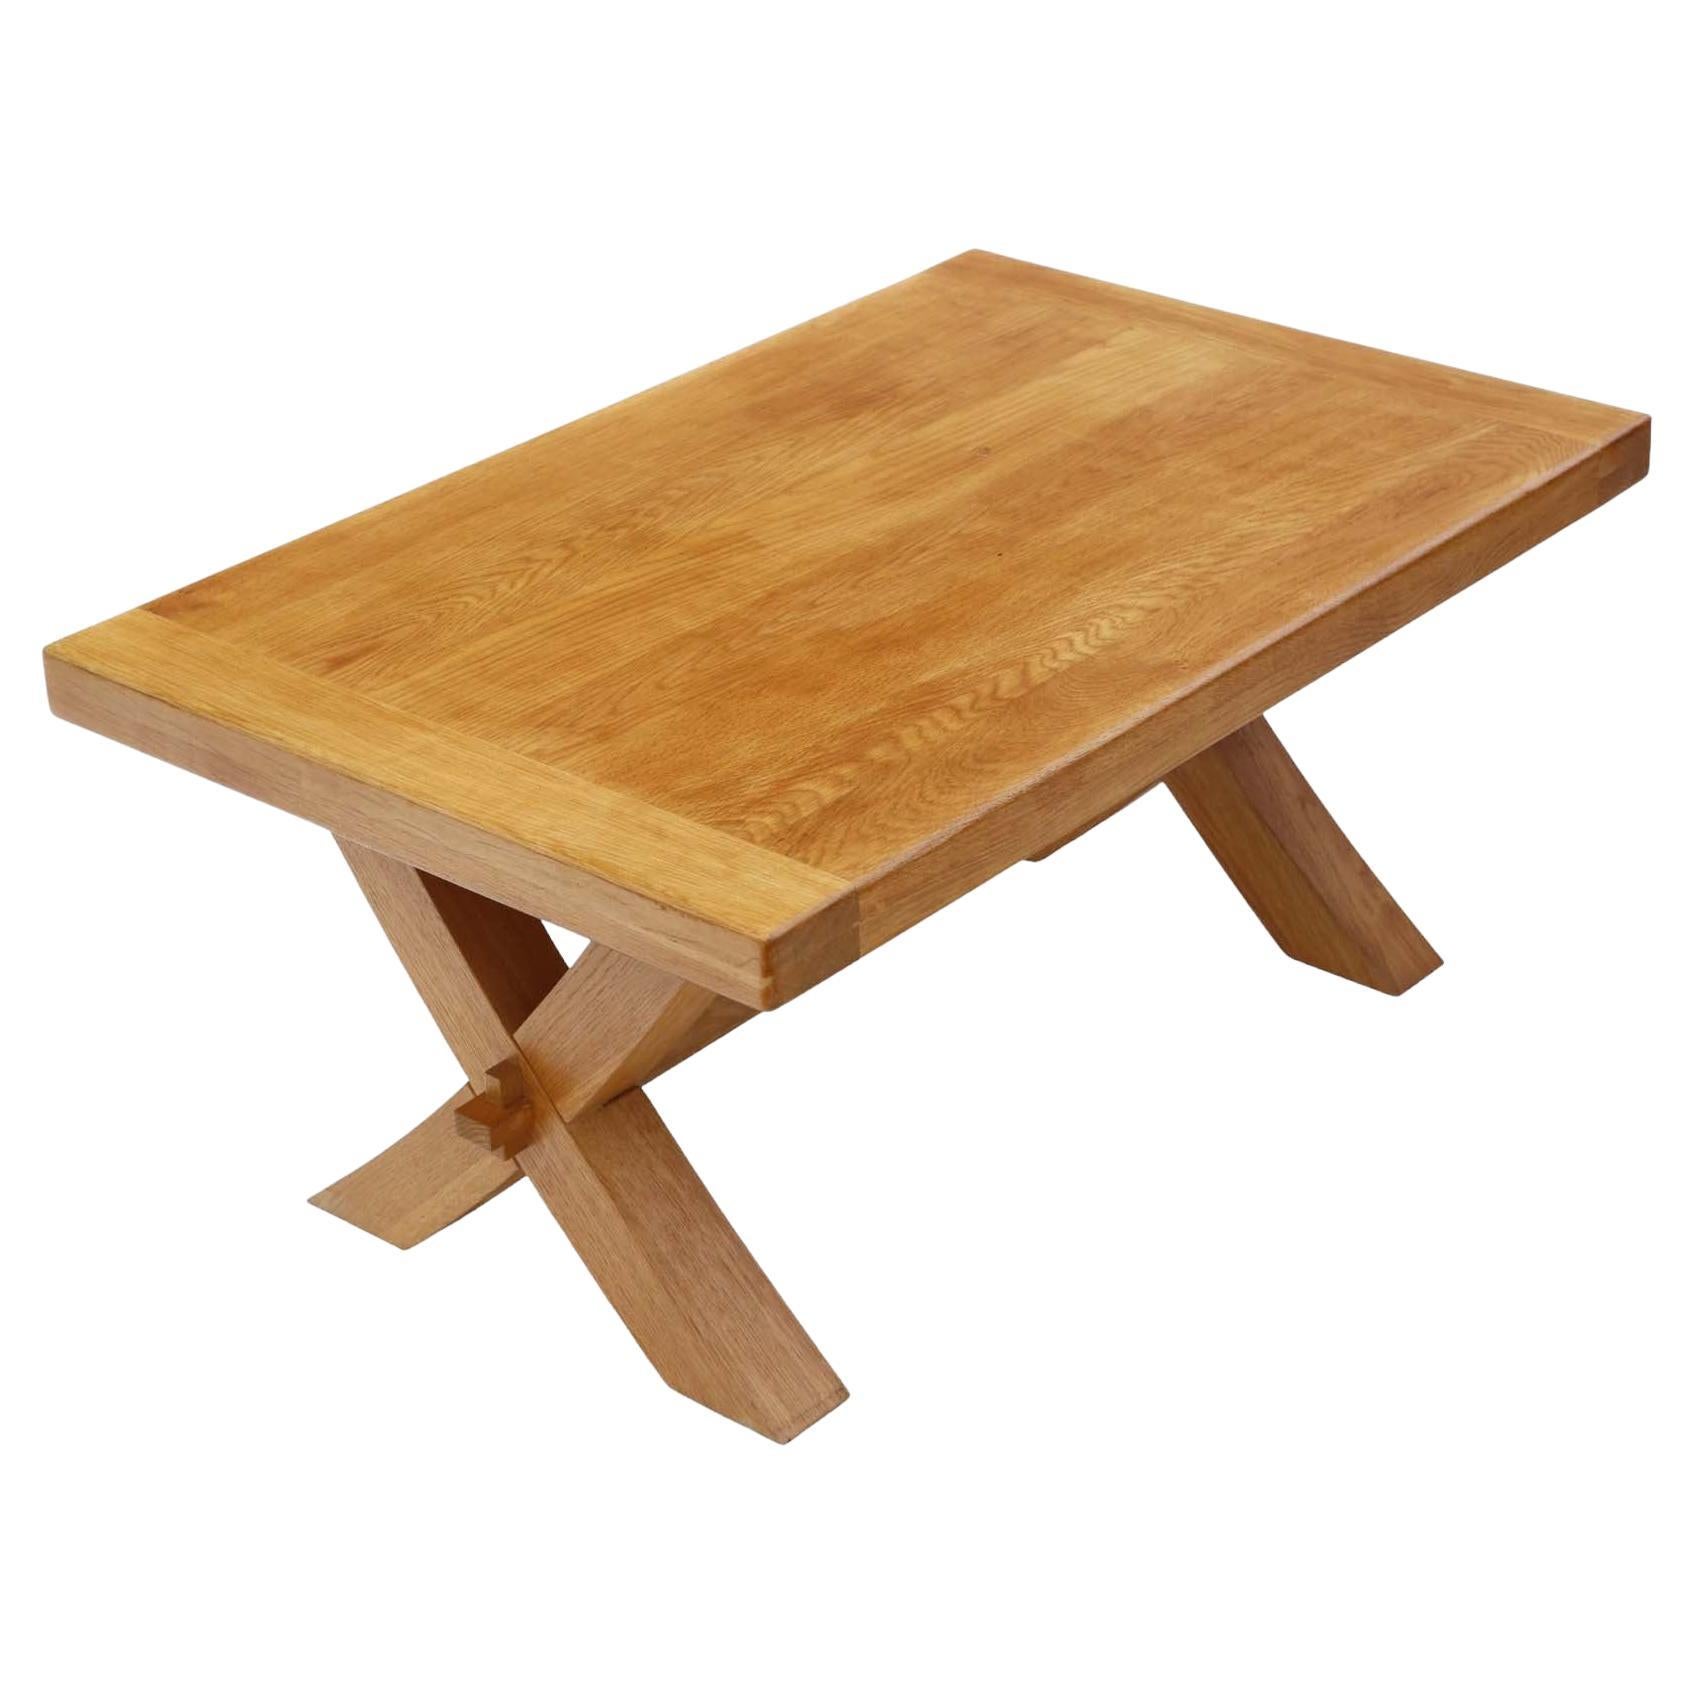 Vintage Solid Light Oak Coffee Table - Quality Occasional Side Table For Sale